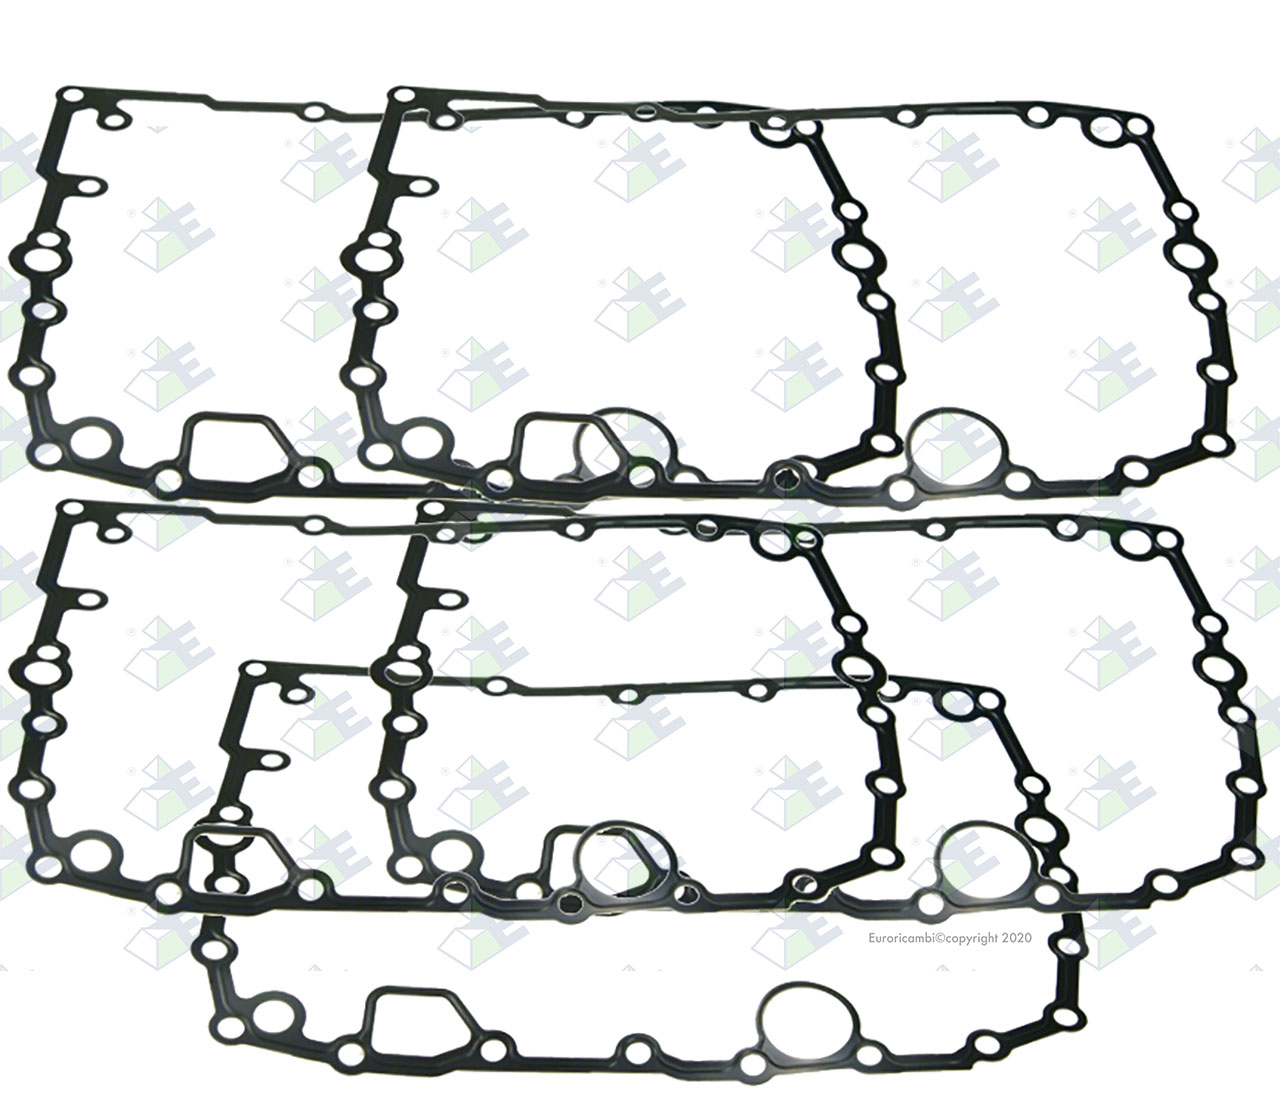 SHEET GASKET suitable to AM GEARS 86348